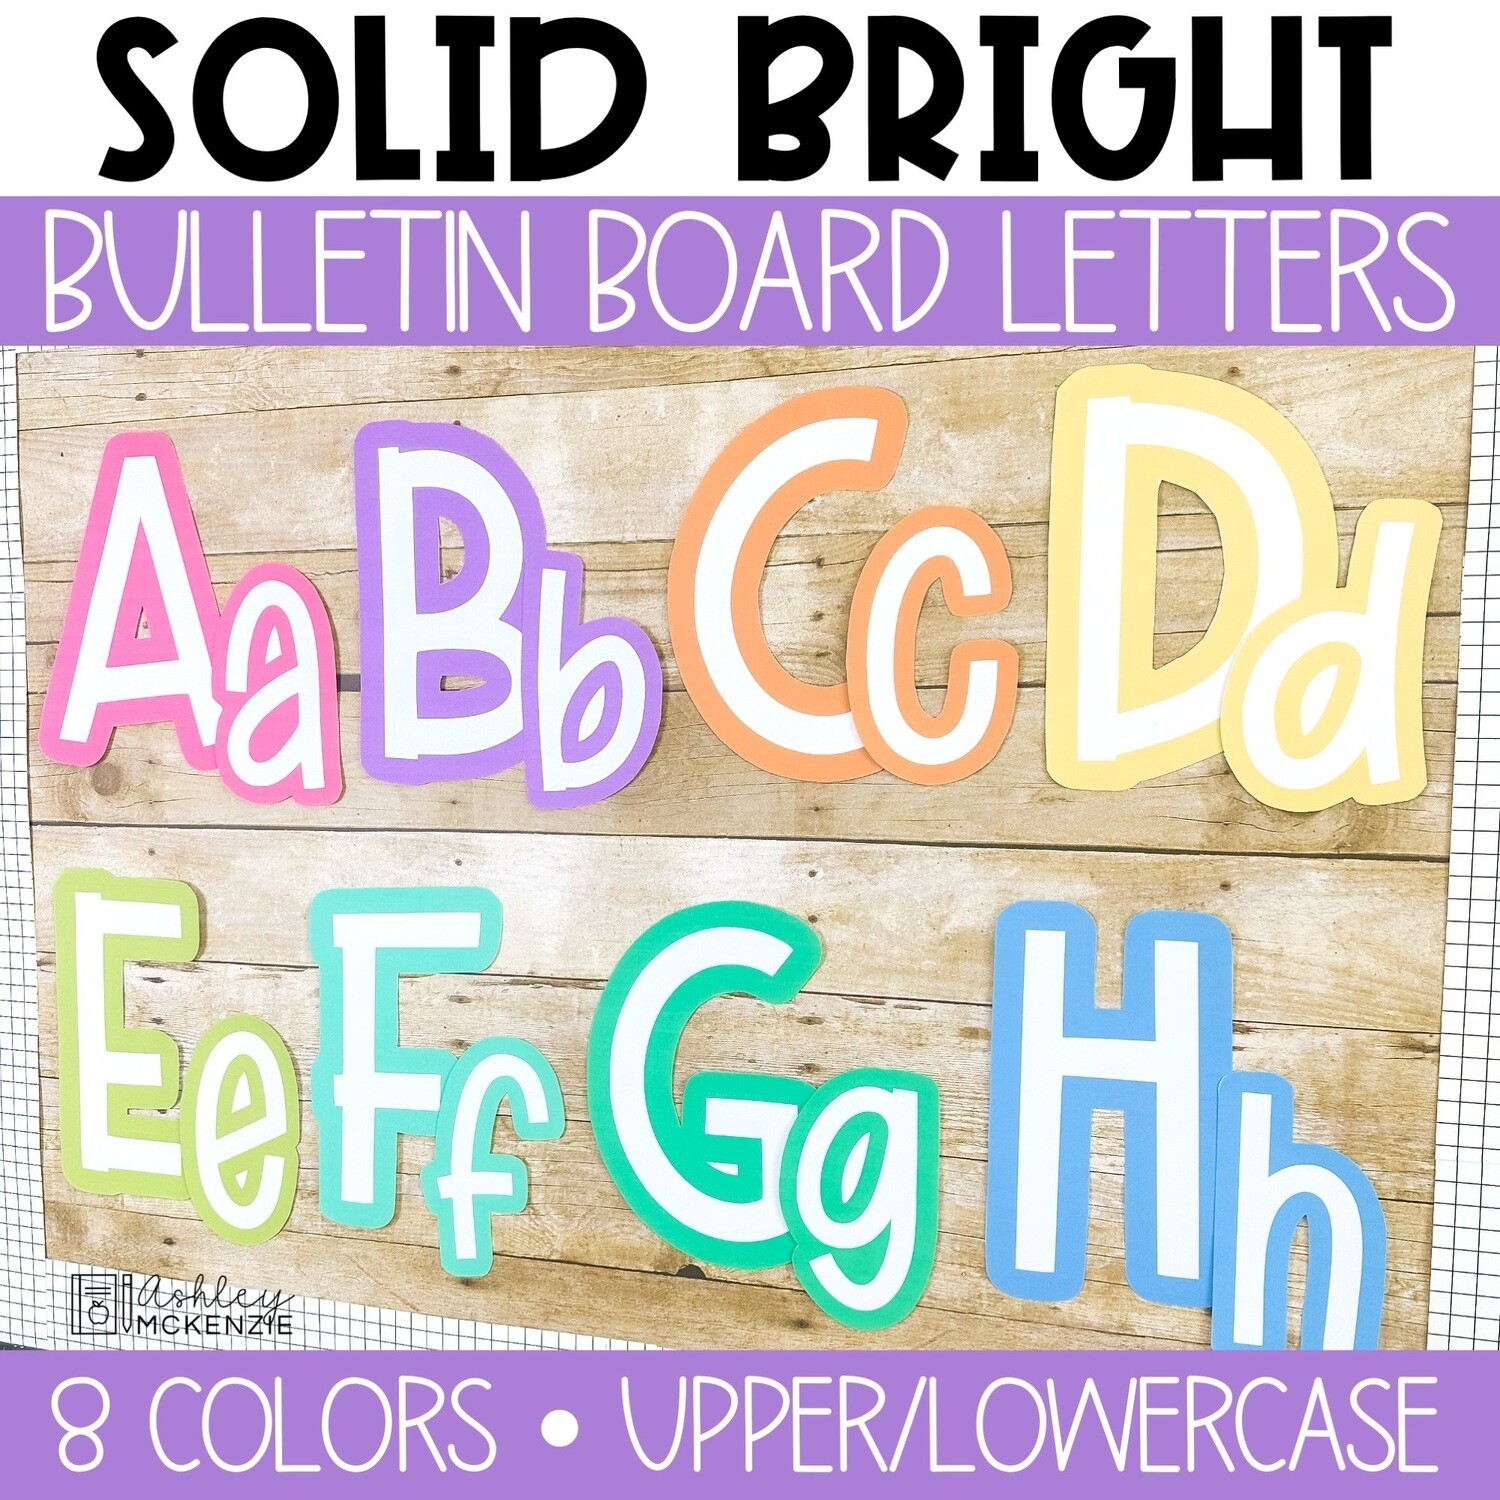 Solid Bright A Z Bulletin Board Letters To Create Any Saying You Want - Free Printable Bulletin Board Letters